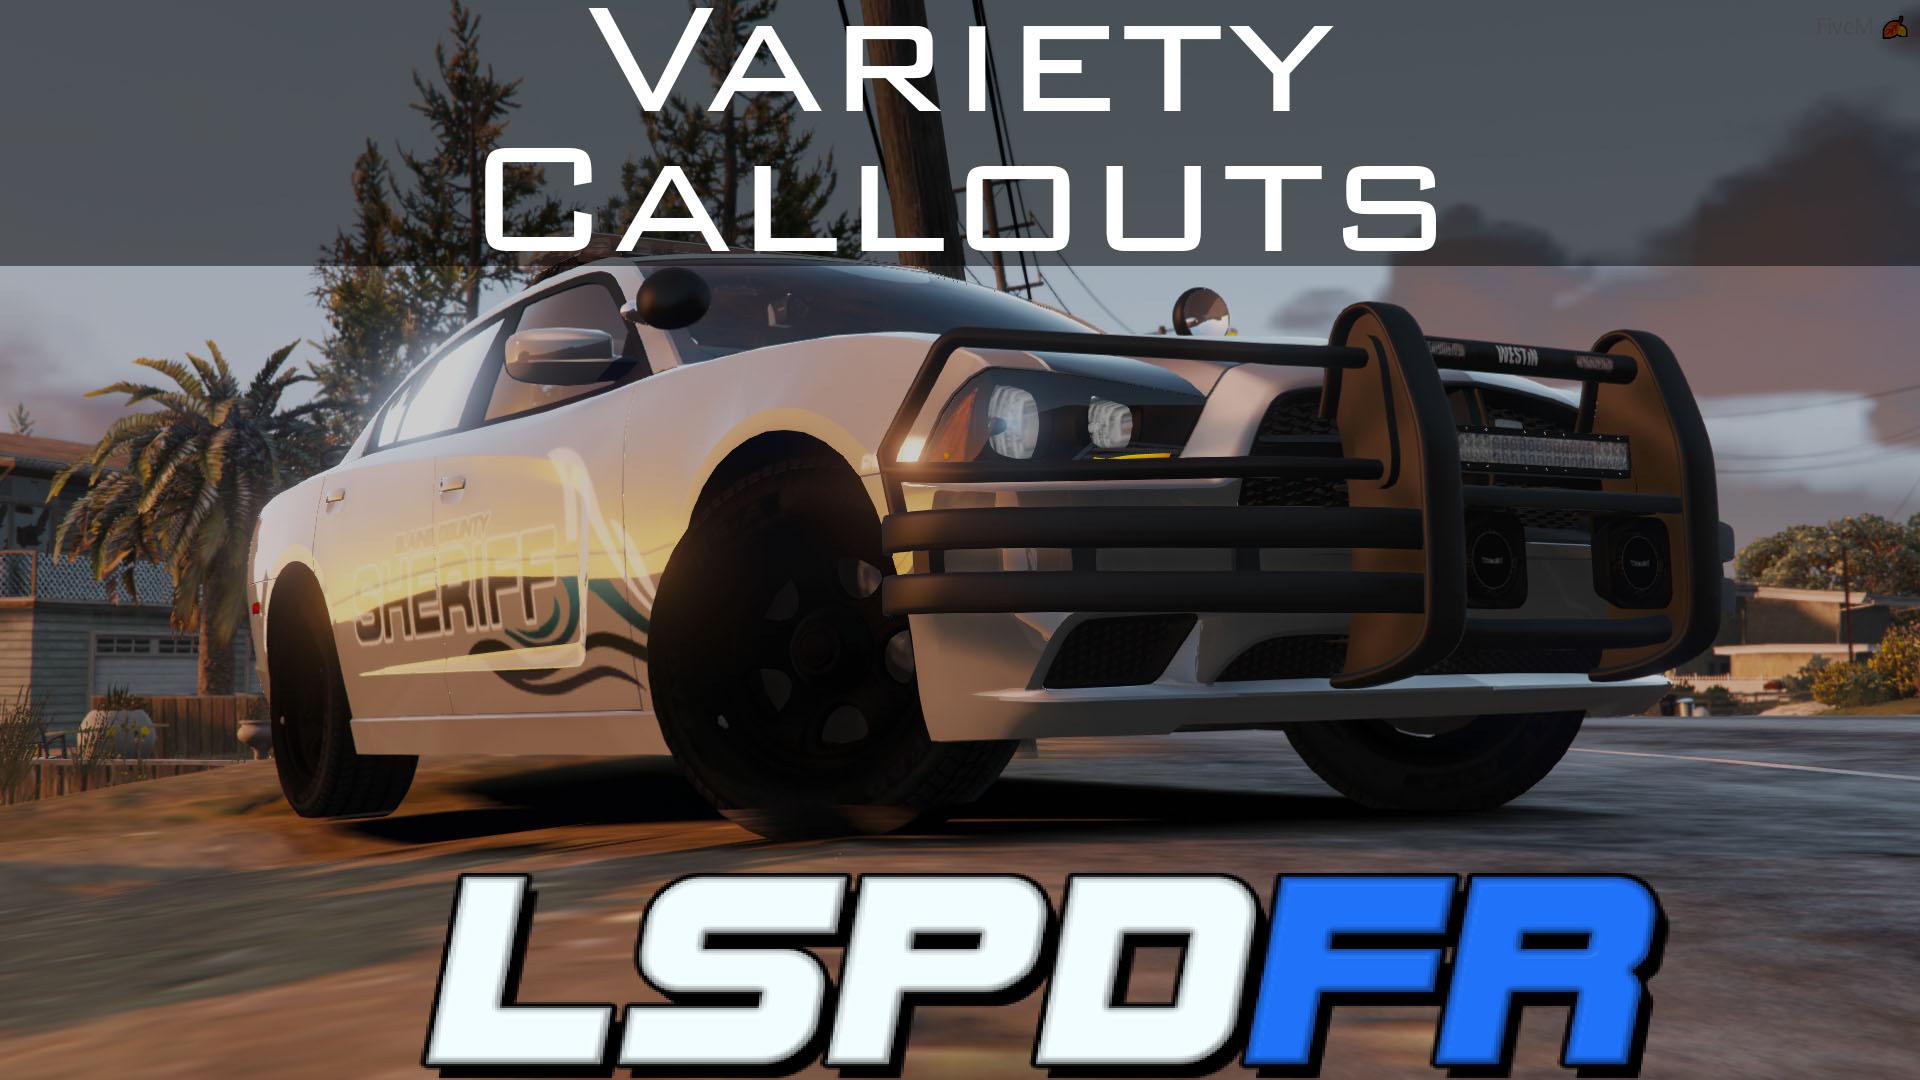 Typical callouts lspdfr gta 5 фото 8